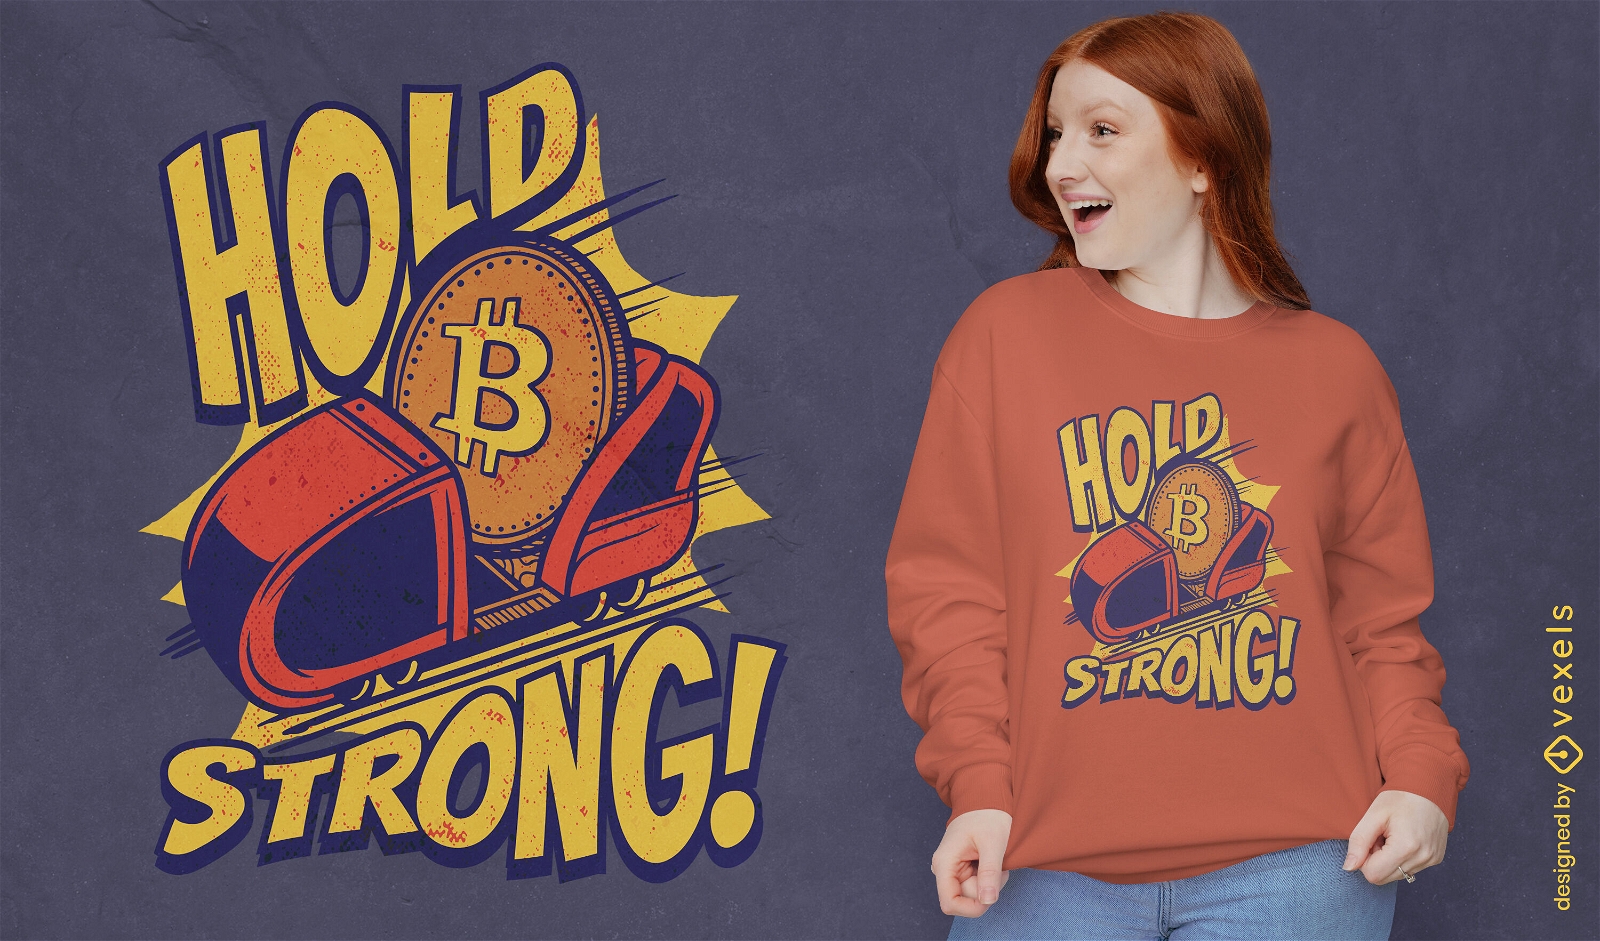 Hold strong cryptocurrency sled t-shirt design